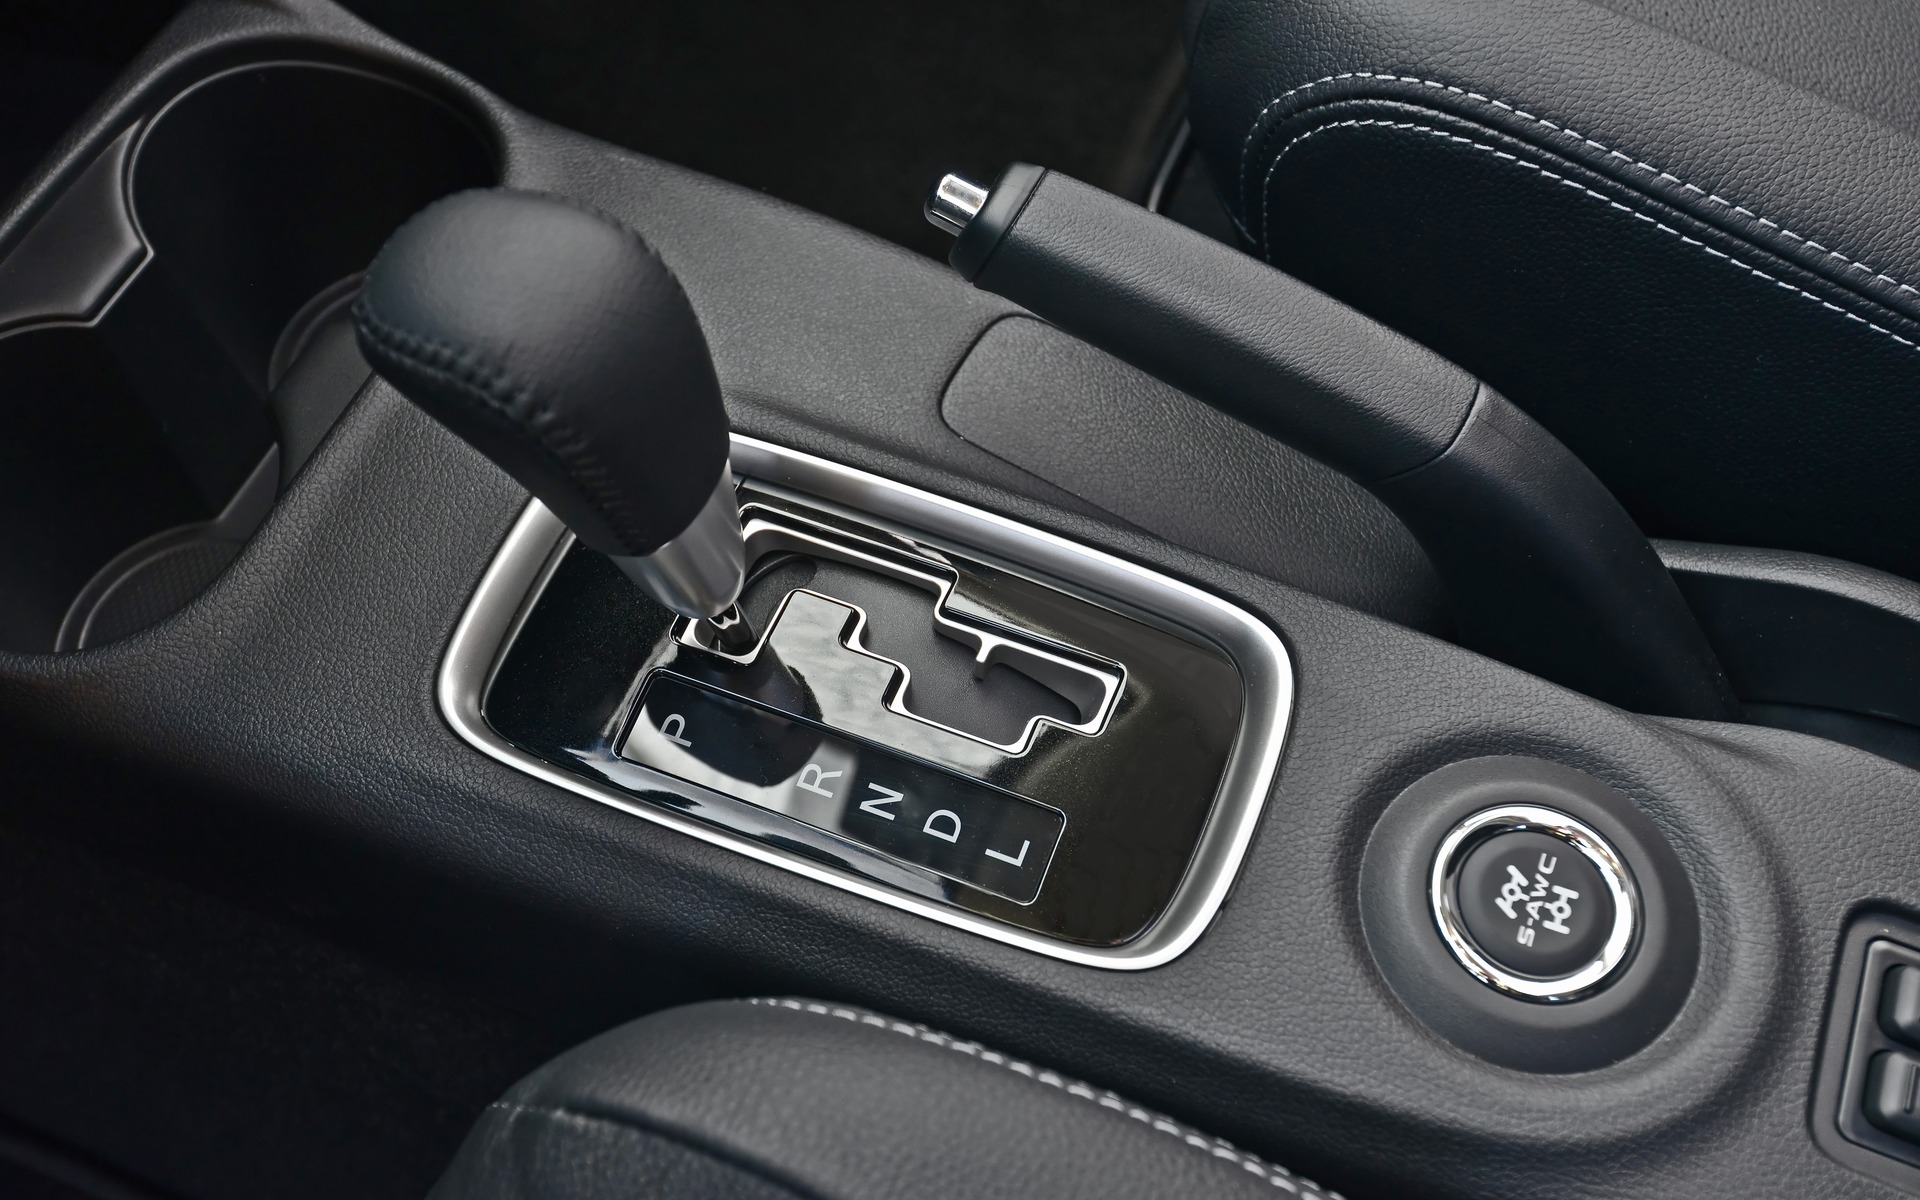 The V6 engine is paired with a six-speed automatic transmission.